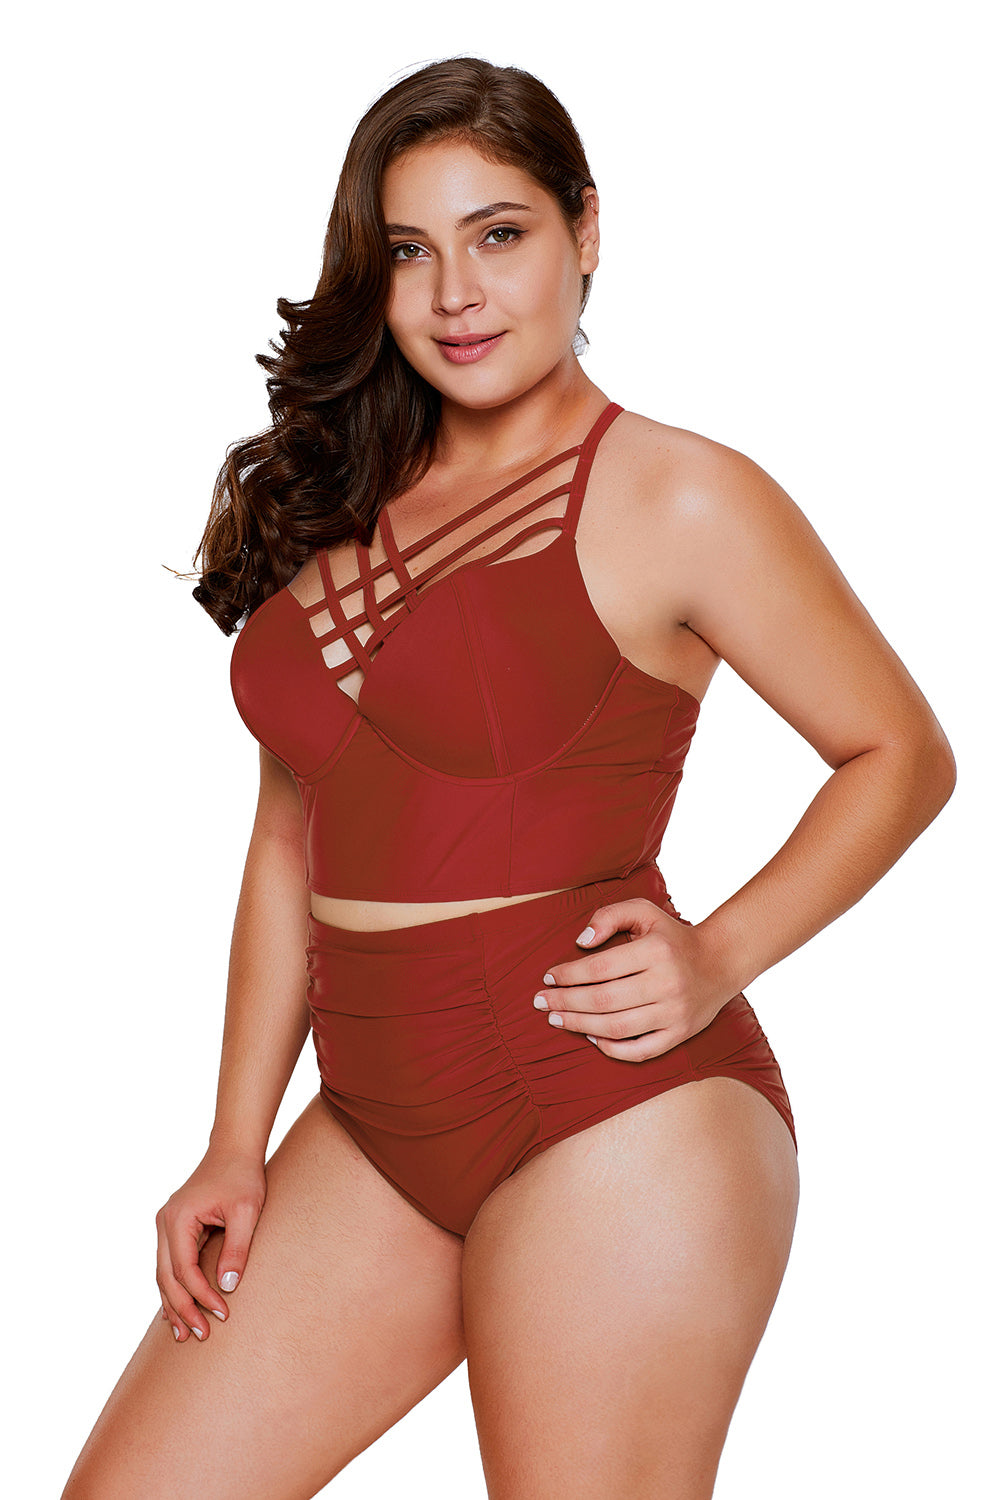 Red Strappy Neck Detail High Waist Swimsuit